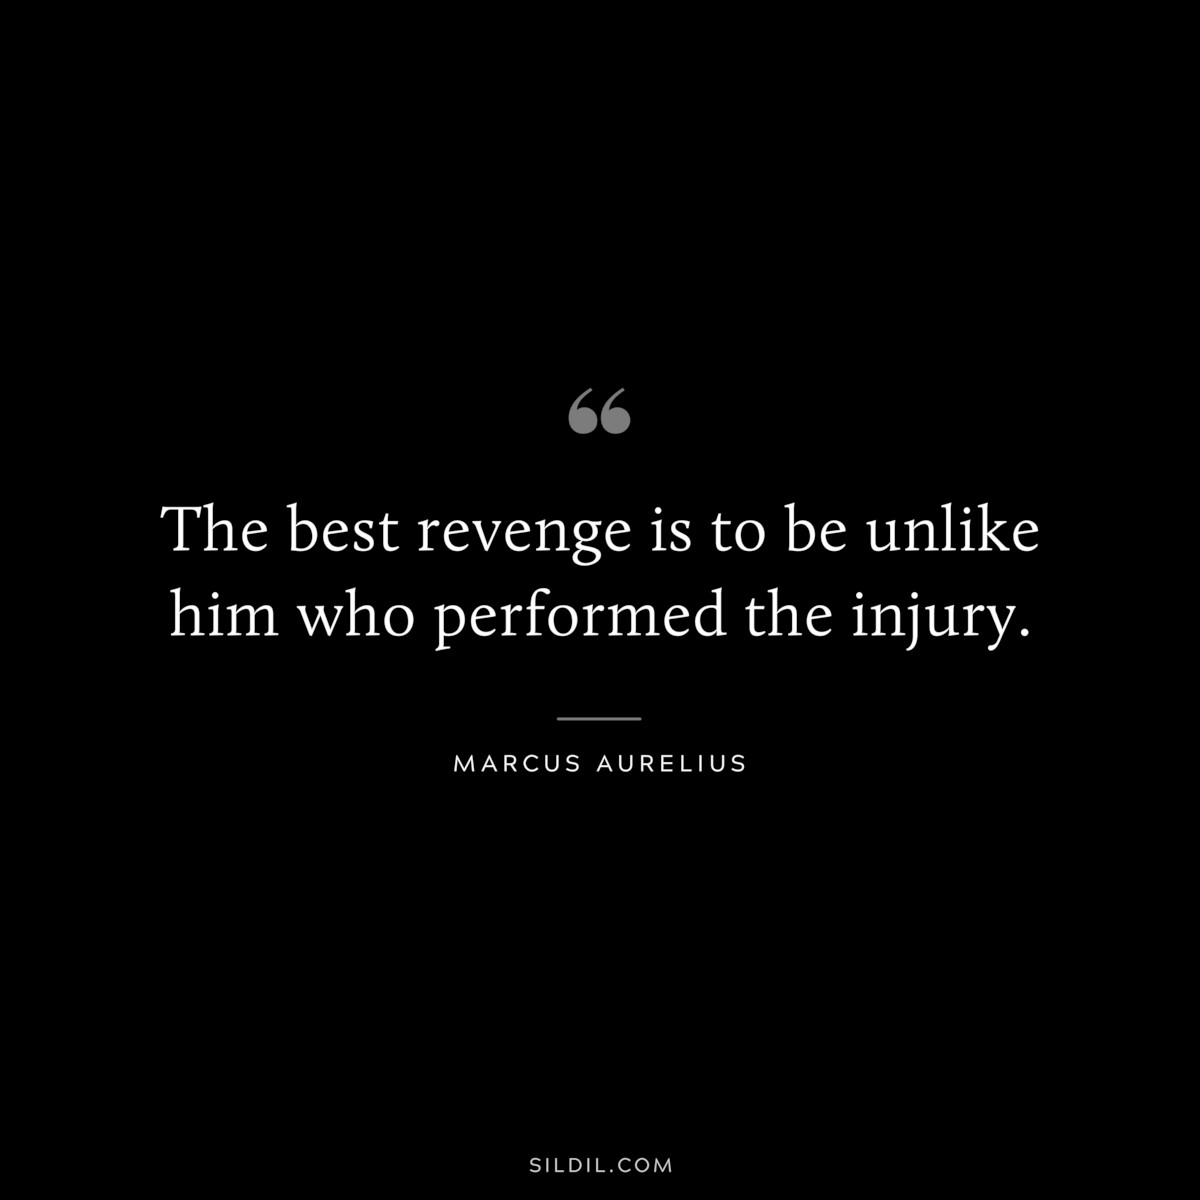 The best revenge is to be unlike him who performed the injury. ― Marcus Aurelius